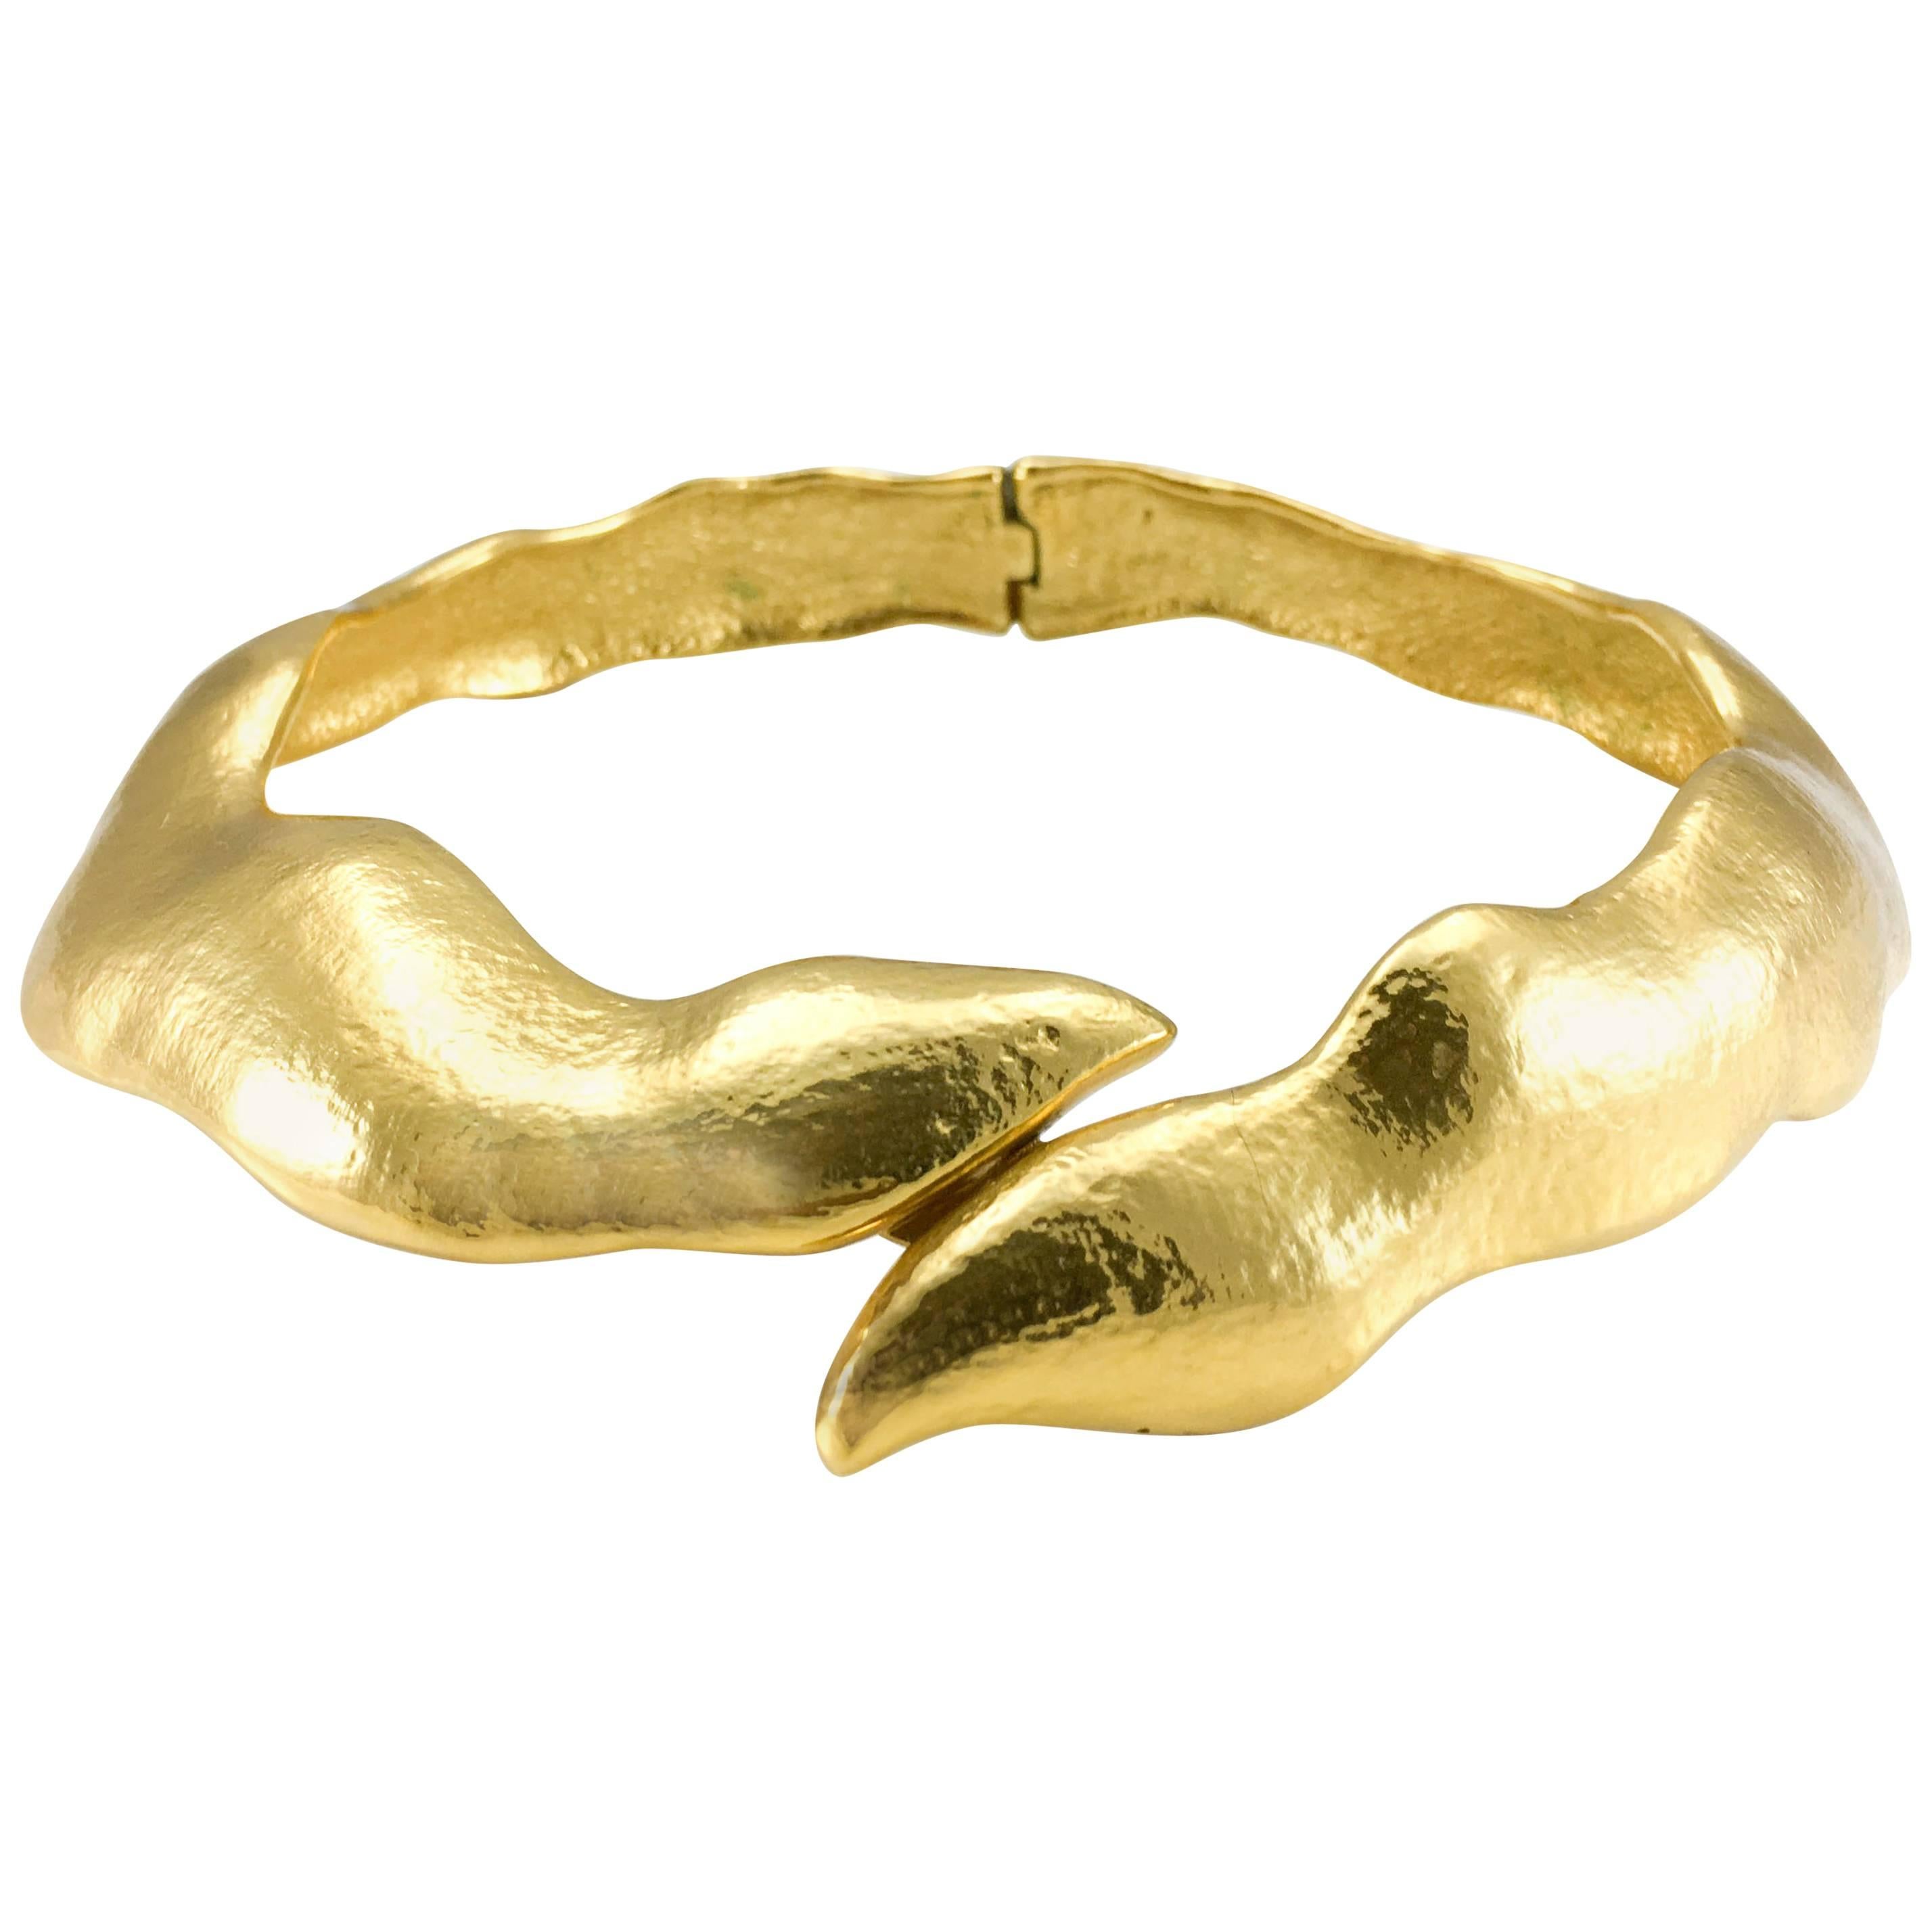 1992 Yves Saint Laurent Runway Look Gold-Plated Snake Necklace For Sale